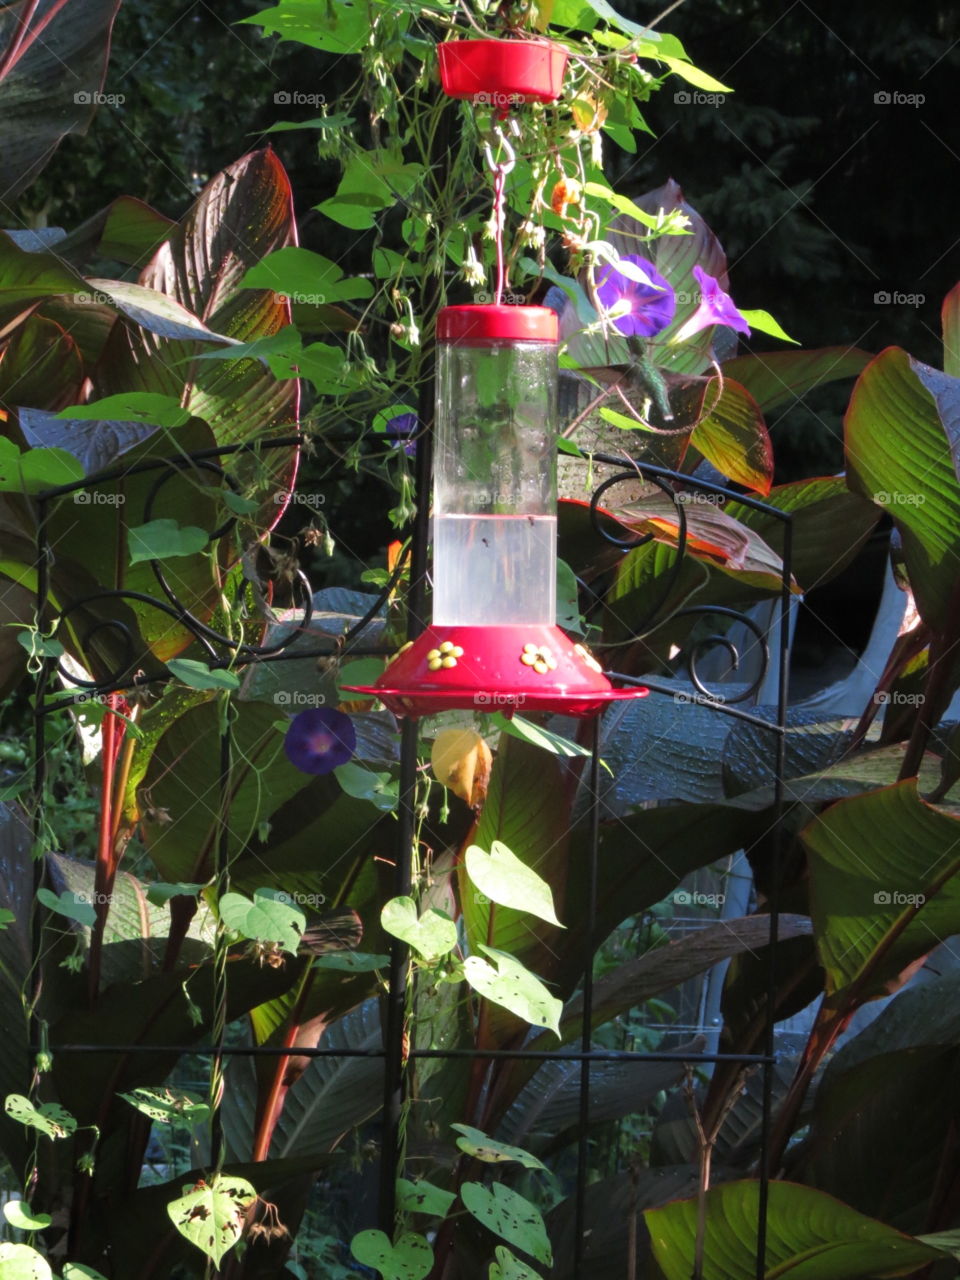 Where's the hummingbird? Feeder with a camouflaged hummingbird.